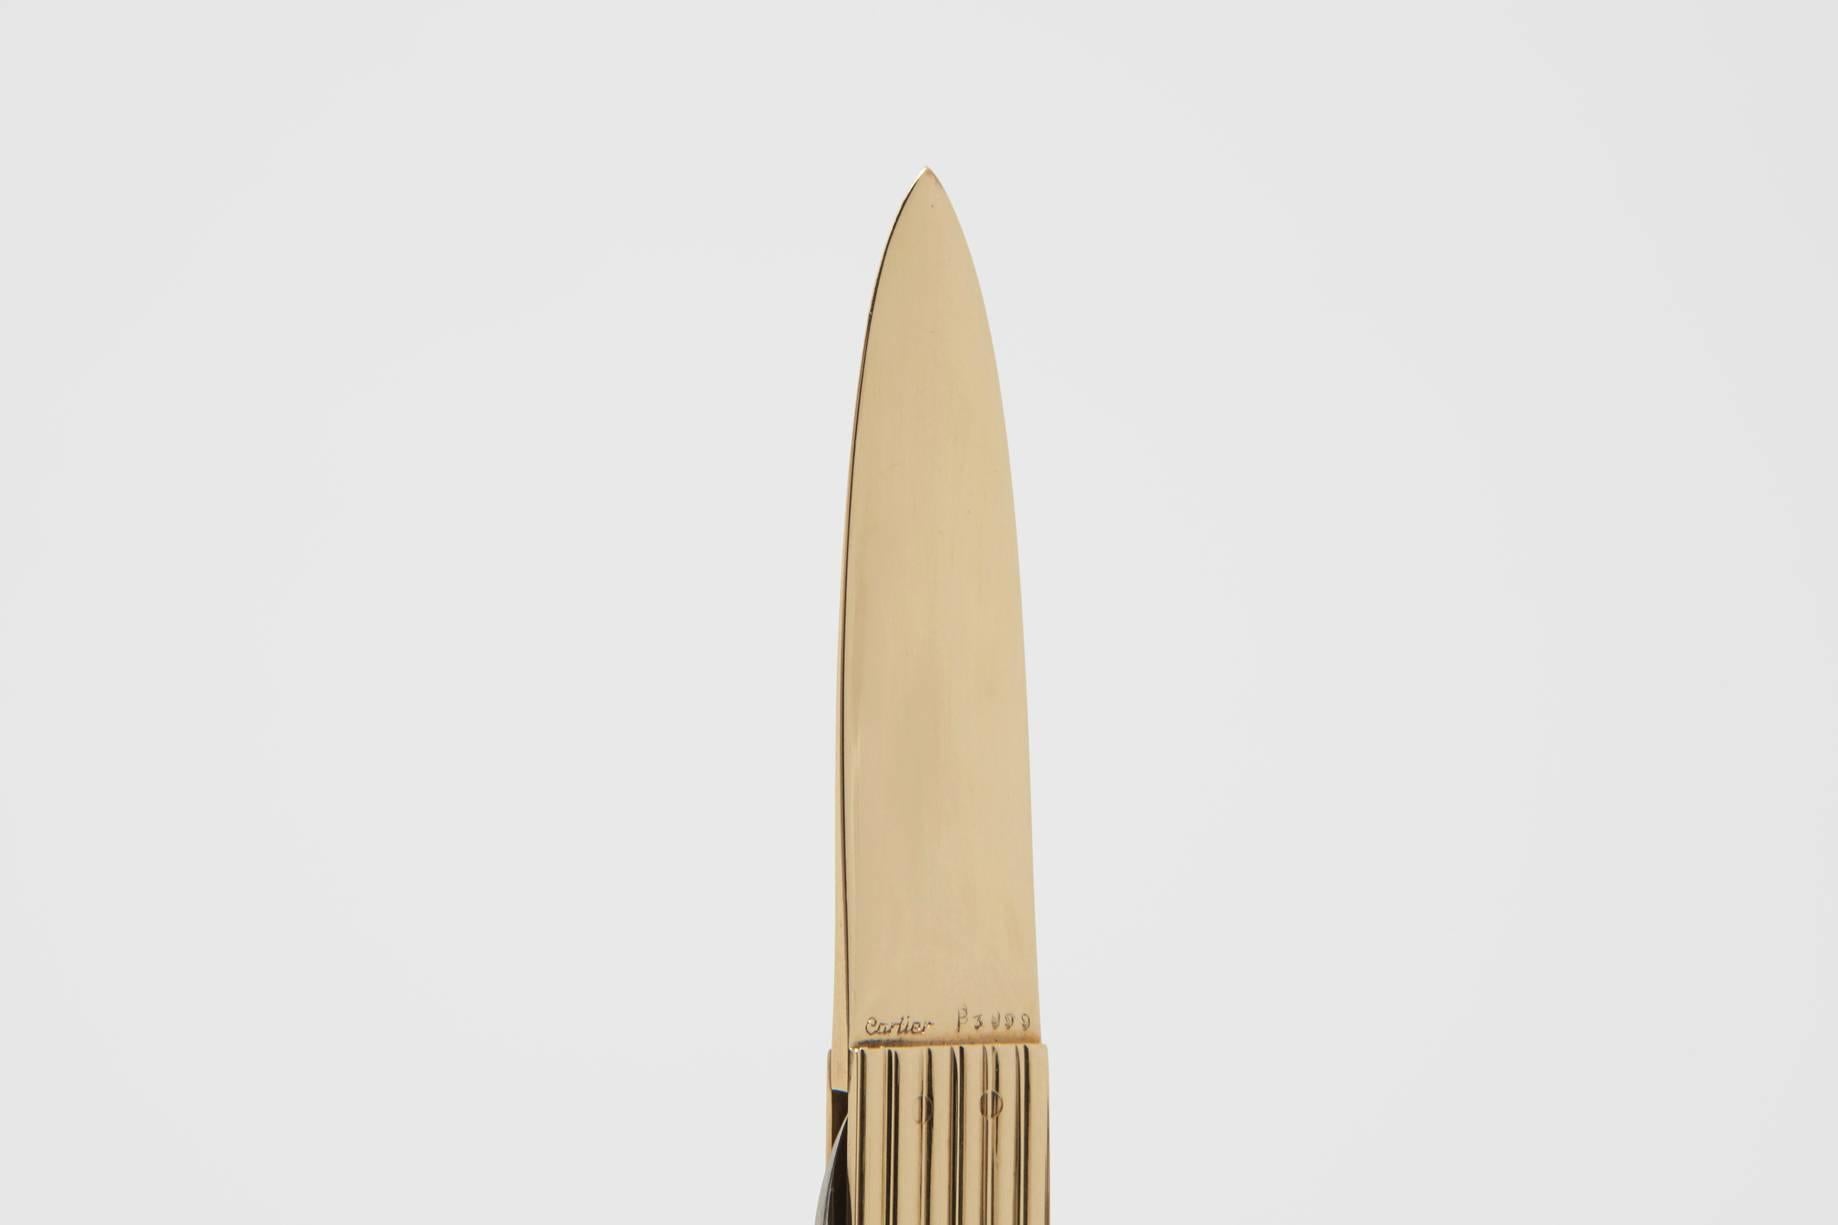 A solid gold Cartier signed letter opener with stainless steel retractable bladed pocket knife set into the handle. The piece is very finely made, with a comfortable and easy to grip reeded handle, a well designed blade to easily slide into